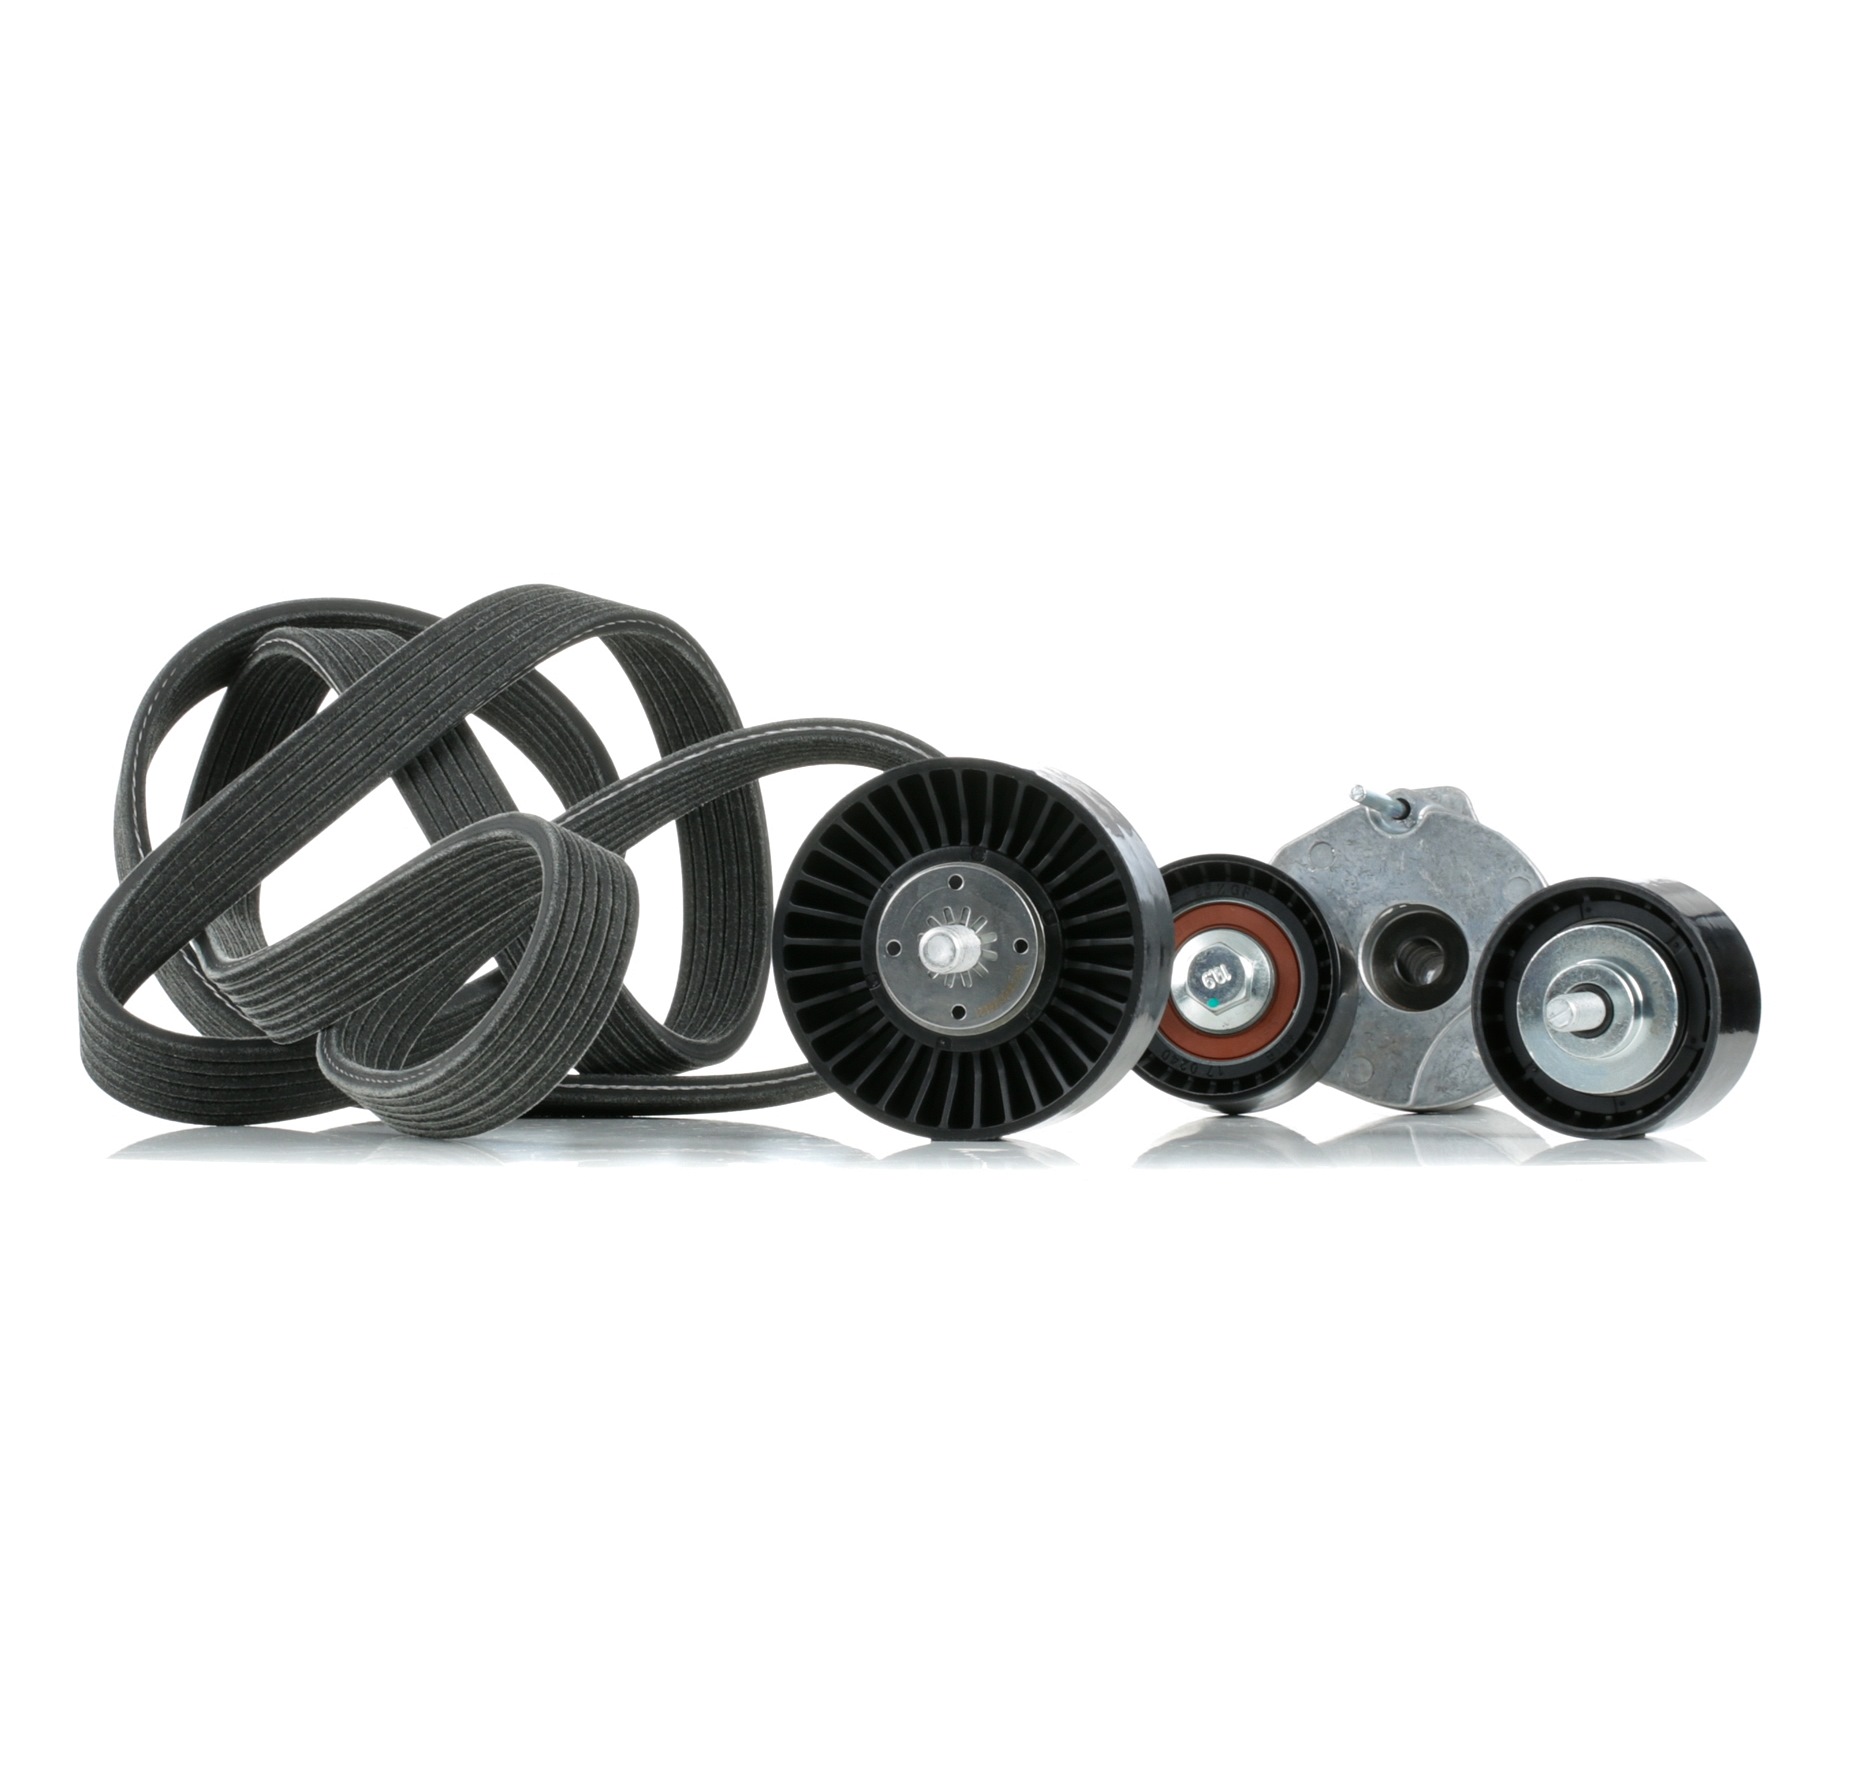 RIDEX Check alternator freewheel clutch & replace if necessary Length: 1817mm, Number of ribs: 6 Serpentine belt kit 542R0397 buy